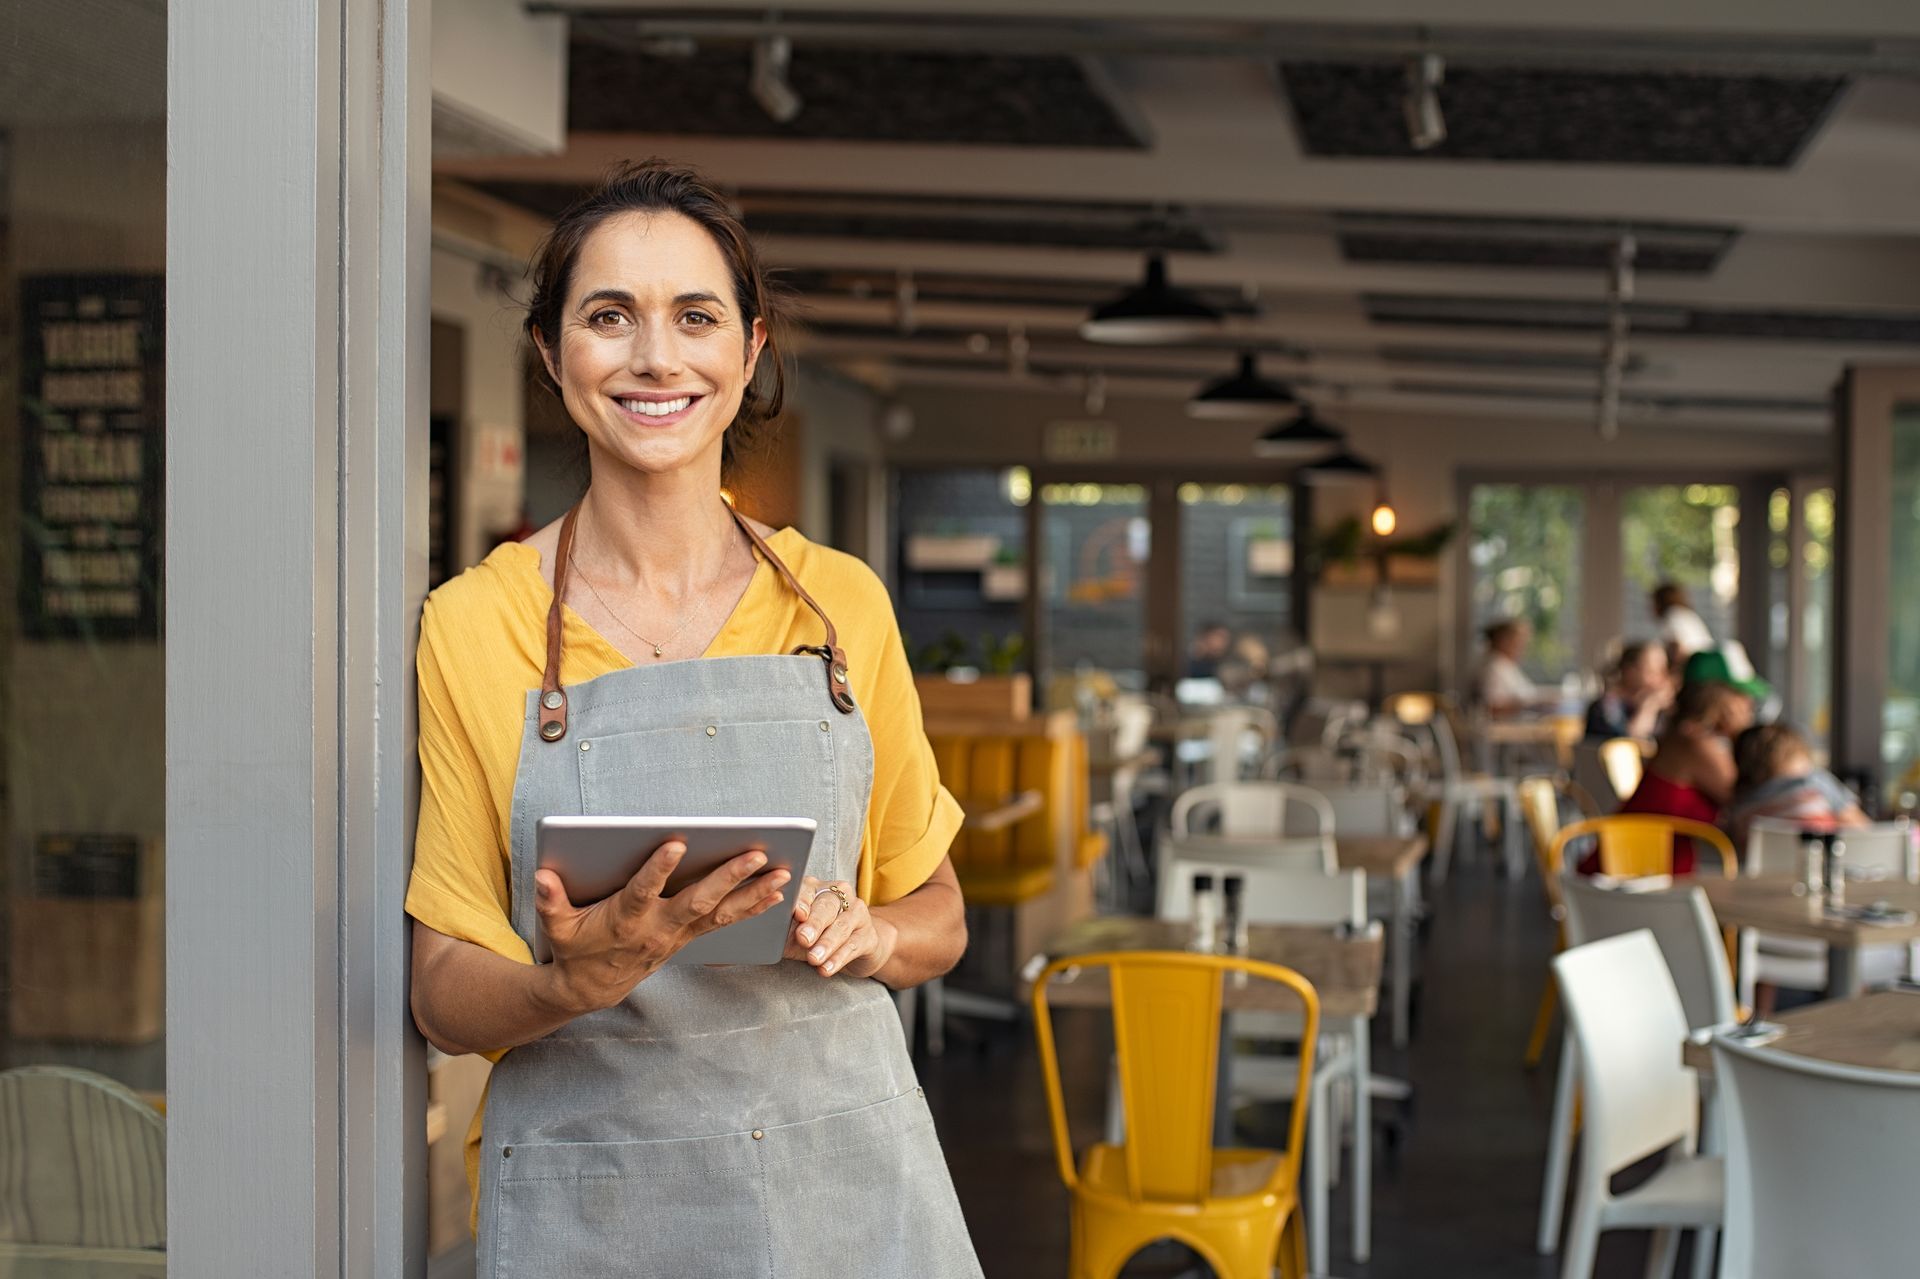 A woman is standing in the doorway of a restaurant holding a tablet.